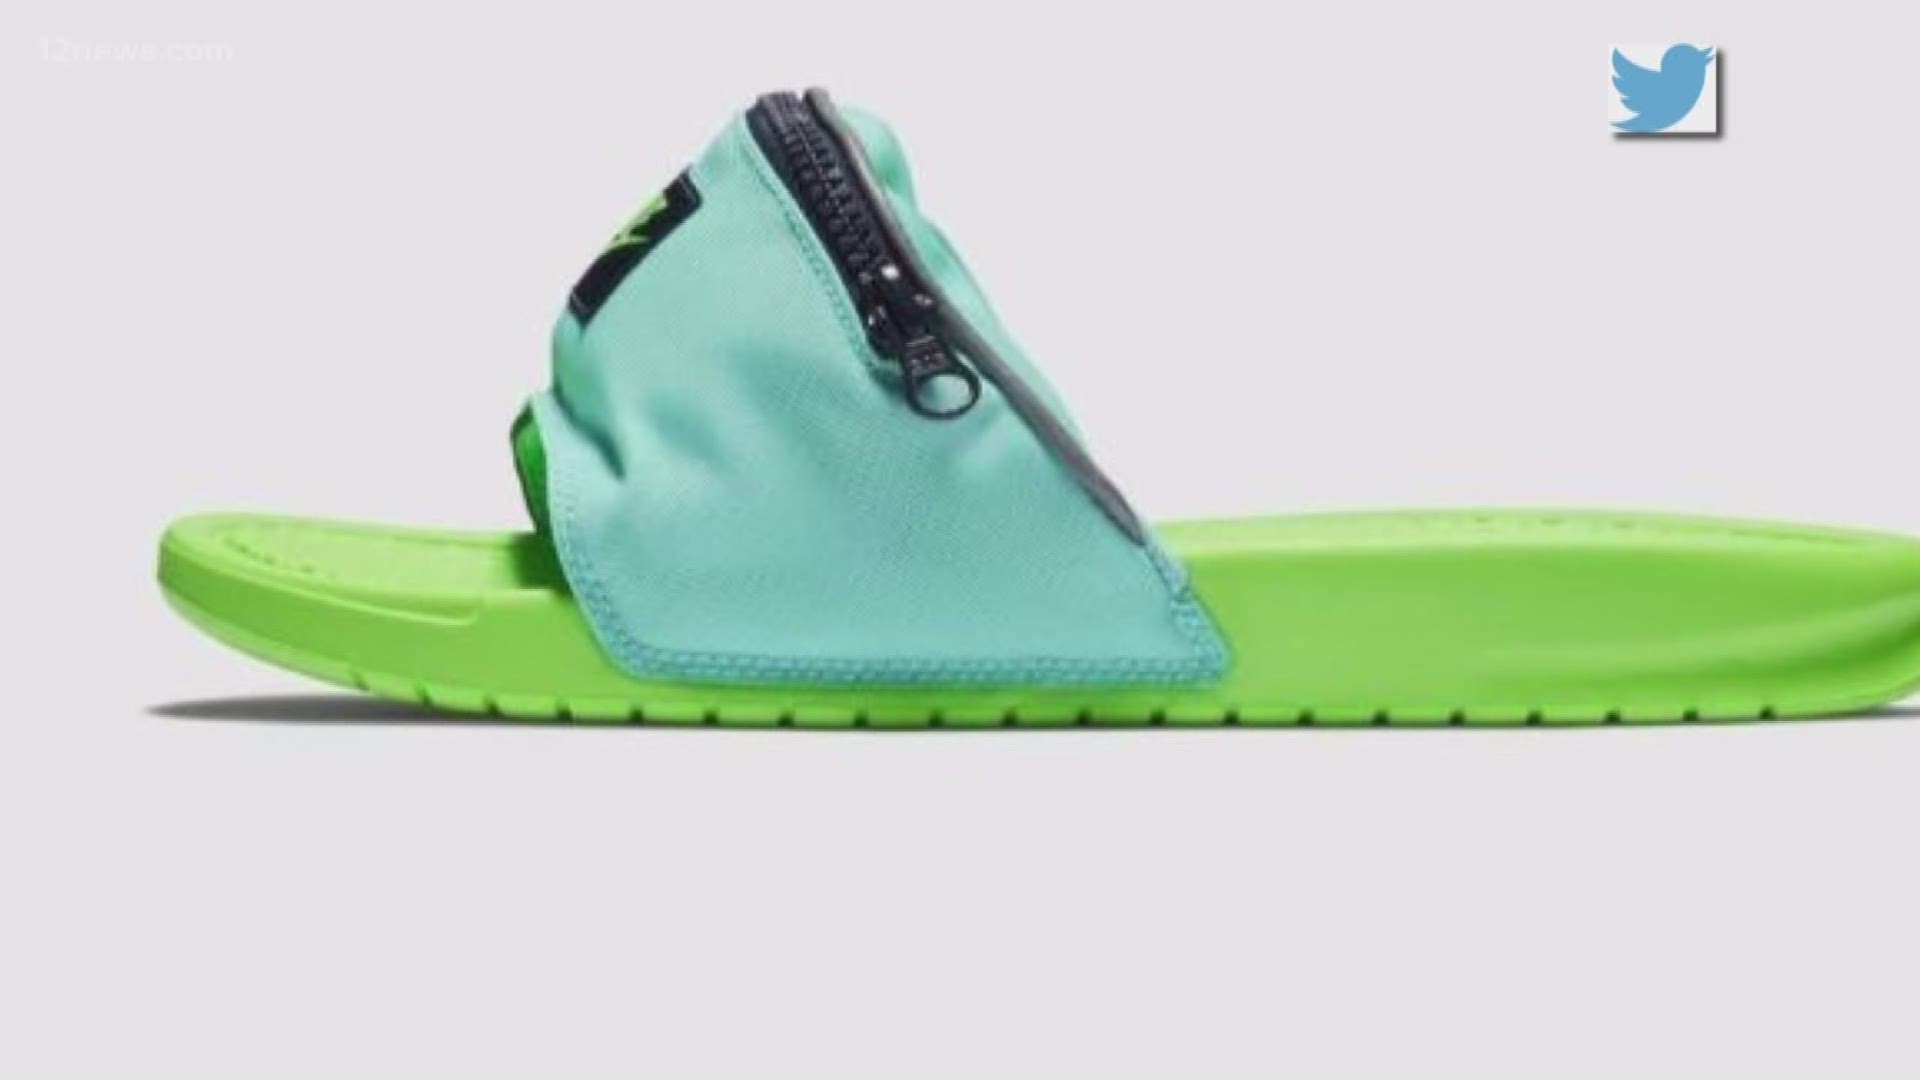 Nike signature slides with fanny packs  combines questionable fashion and function.